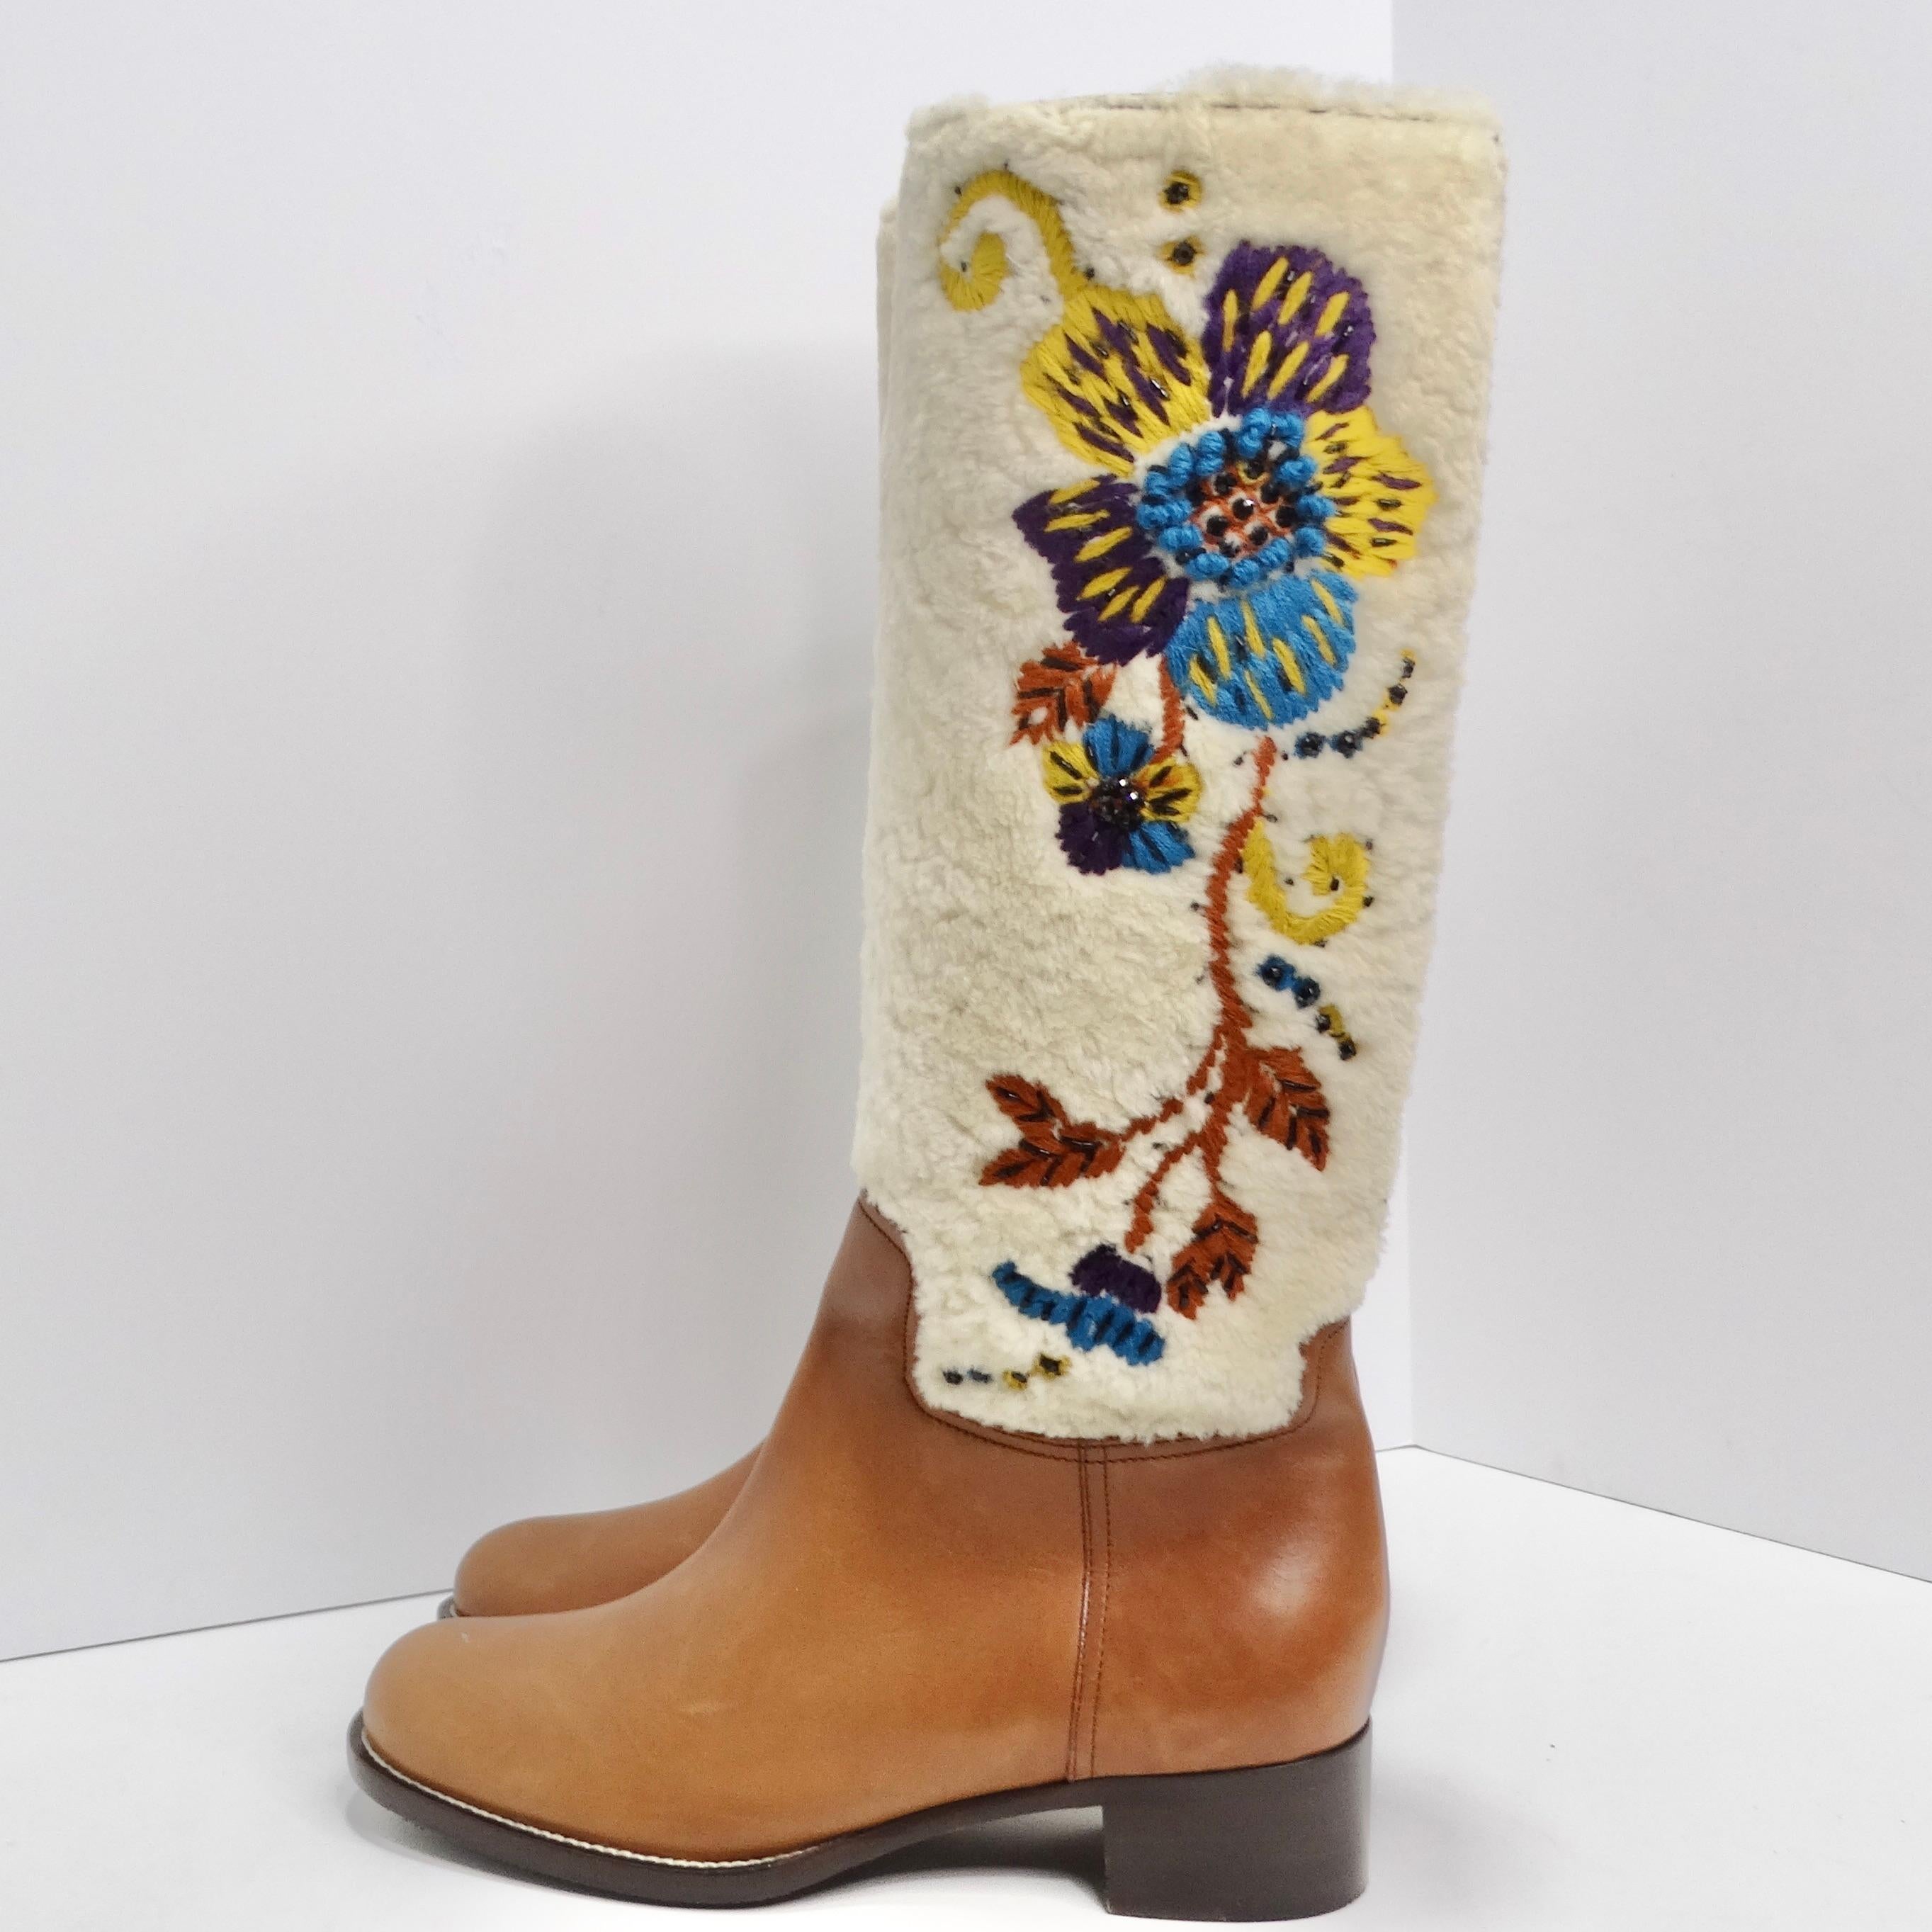  Miu Miu Floral Brown Leather Floral Shearling Riding Boots For Sale 1